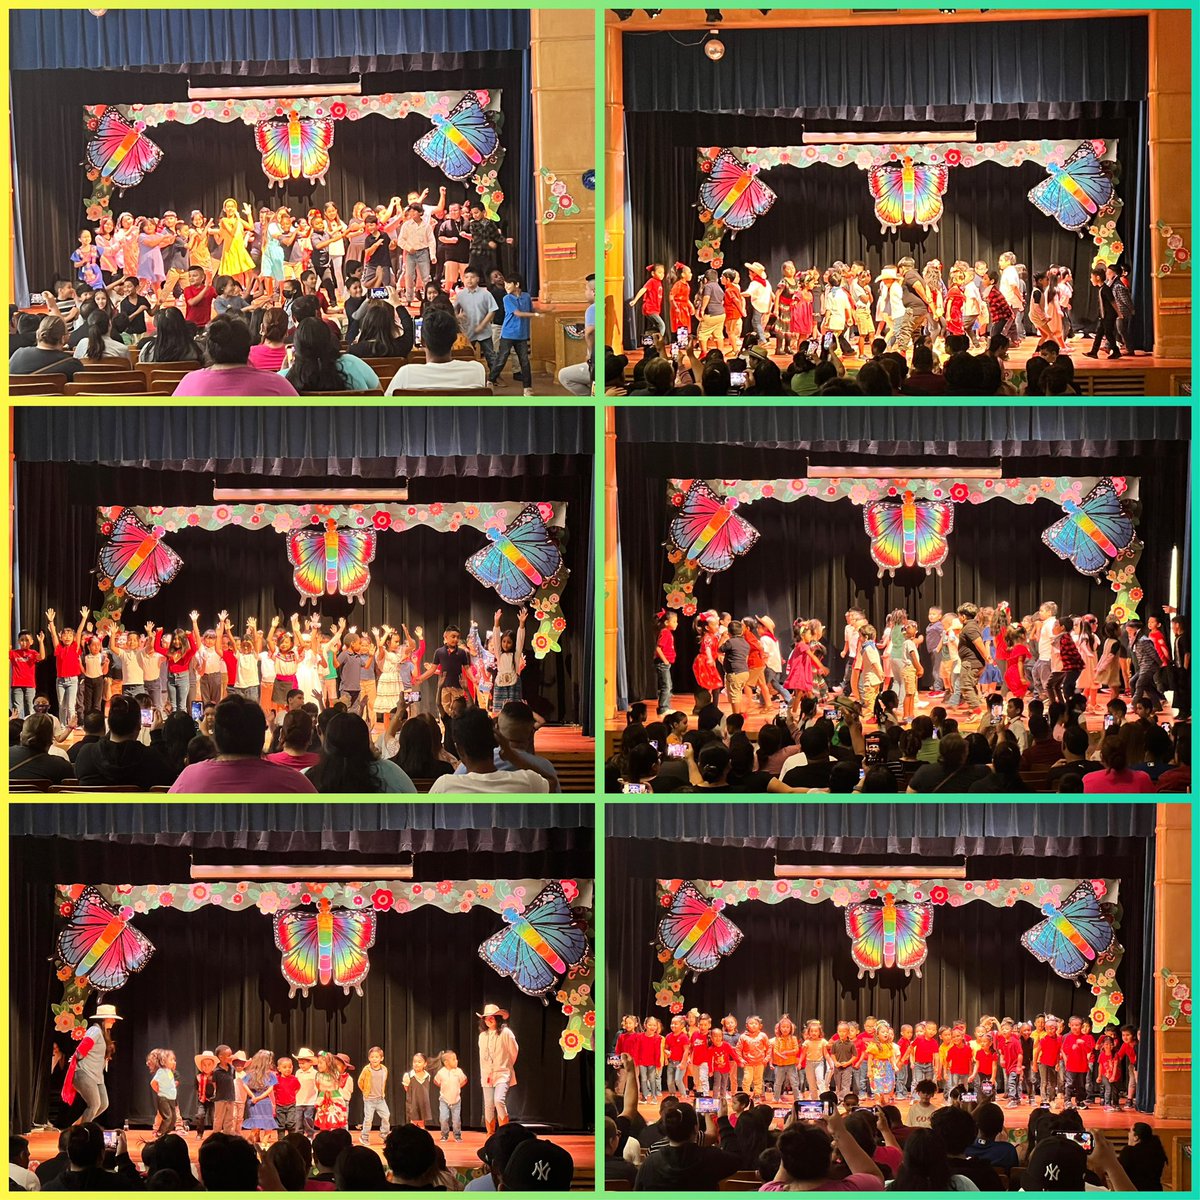 Our PreK-2nd Grade students did an amazing job today at our “Dia Del Los Ninos” Program!! 🧒🏻👦🏾🧒🏼 The dancing, singing, and performances were outstanding!! 👏🏻👏🏻 @_HectorMartinez @LauraRubioGarza @Region2DISD @DallasISDSupt